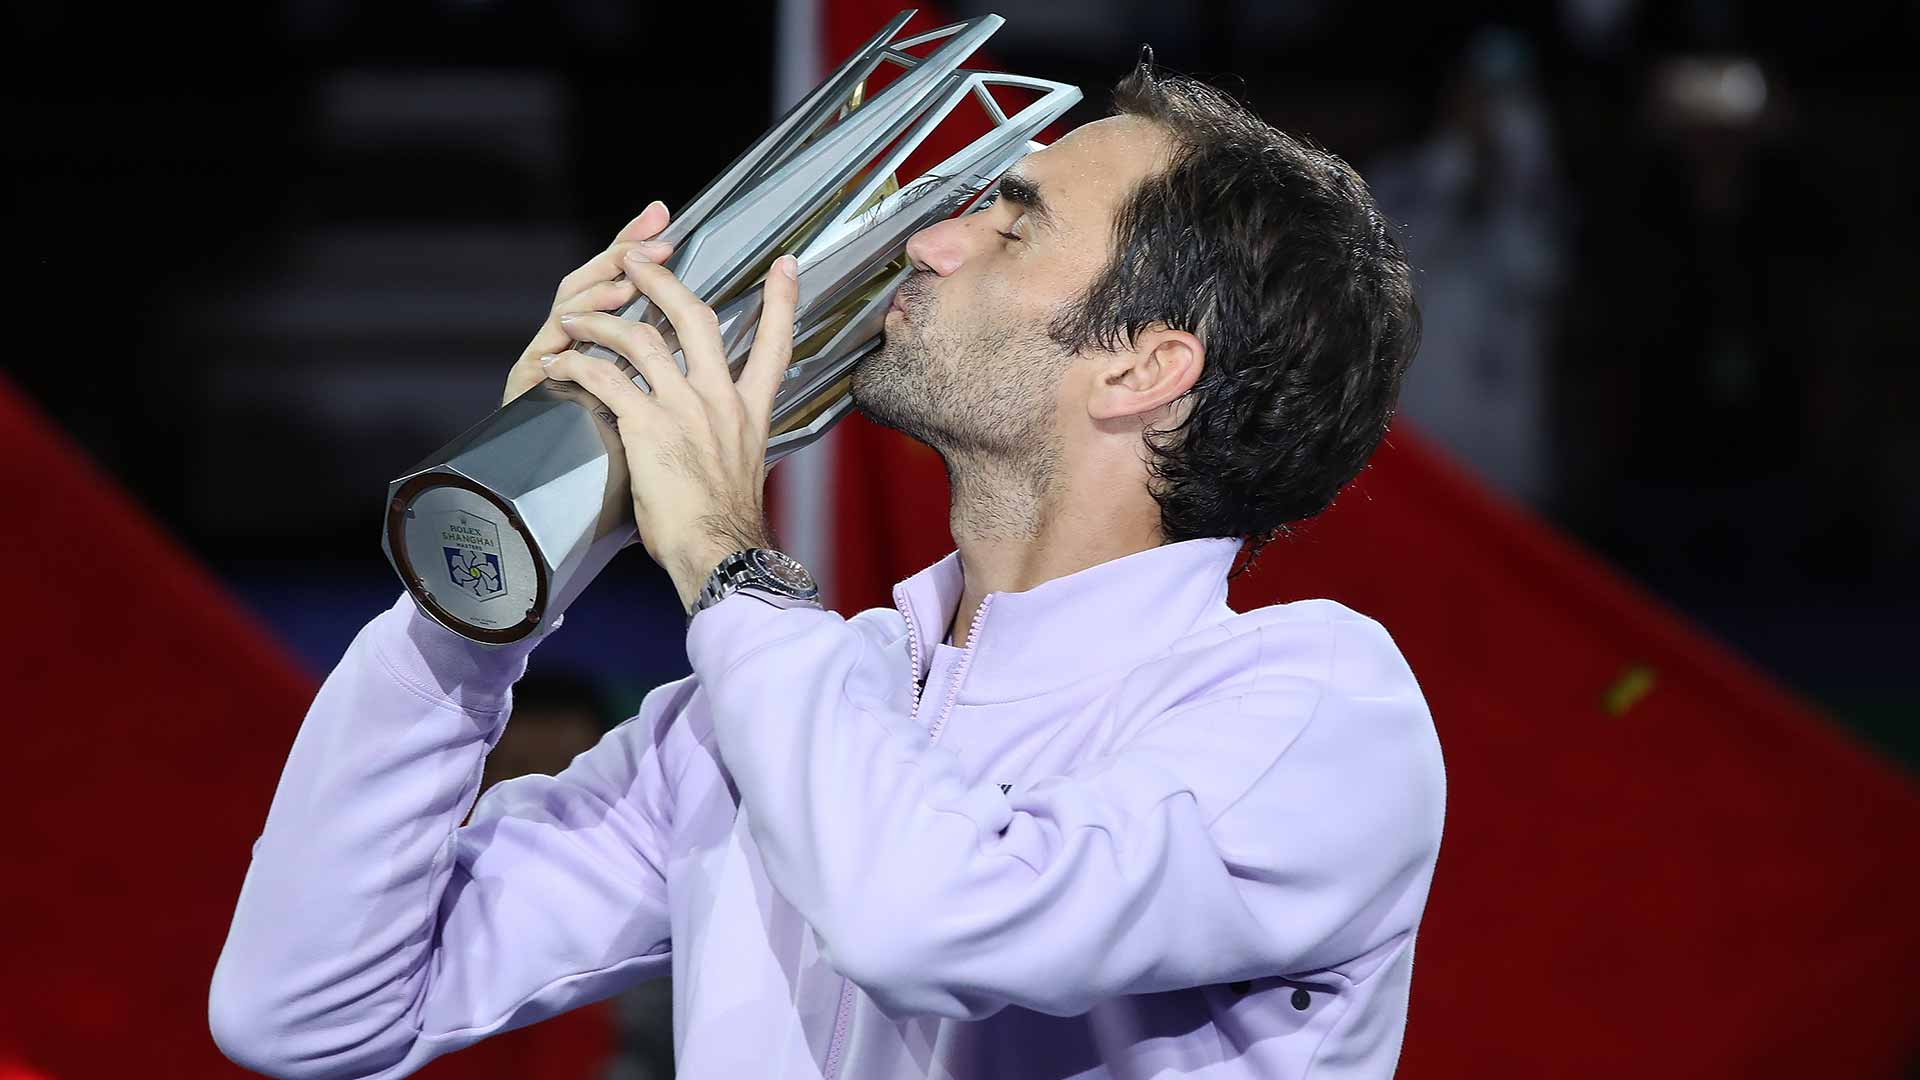 Roger Federer defeats Rafael Nadal for the fourth time in 2017 to win his second title at the Shanghai Rolex Masters.